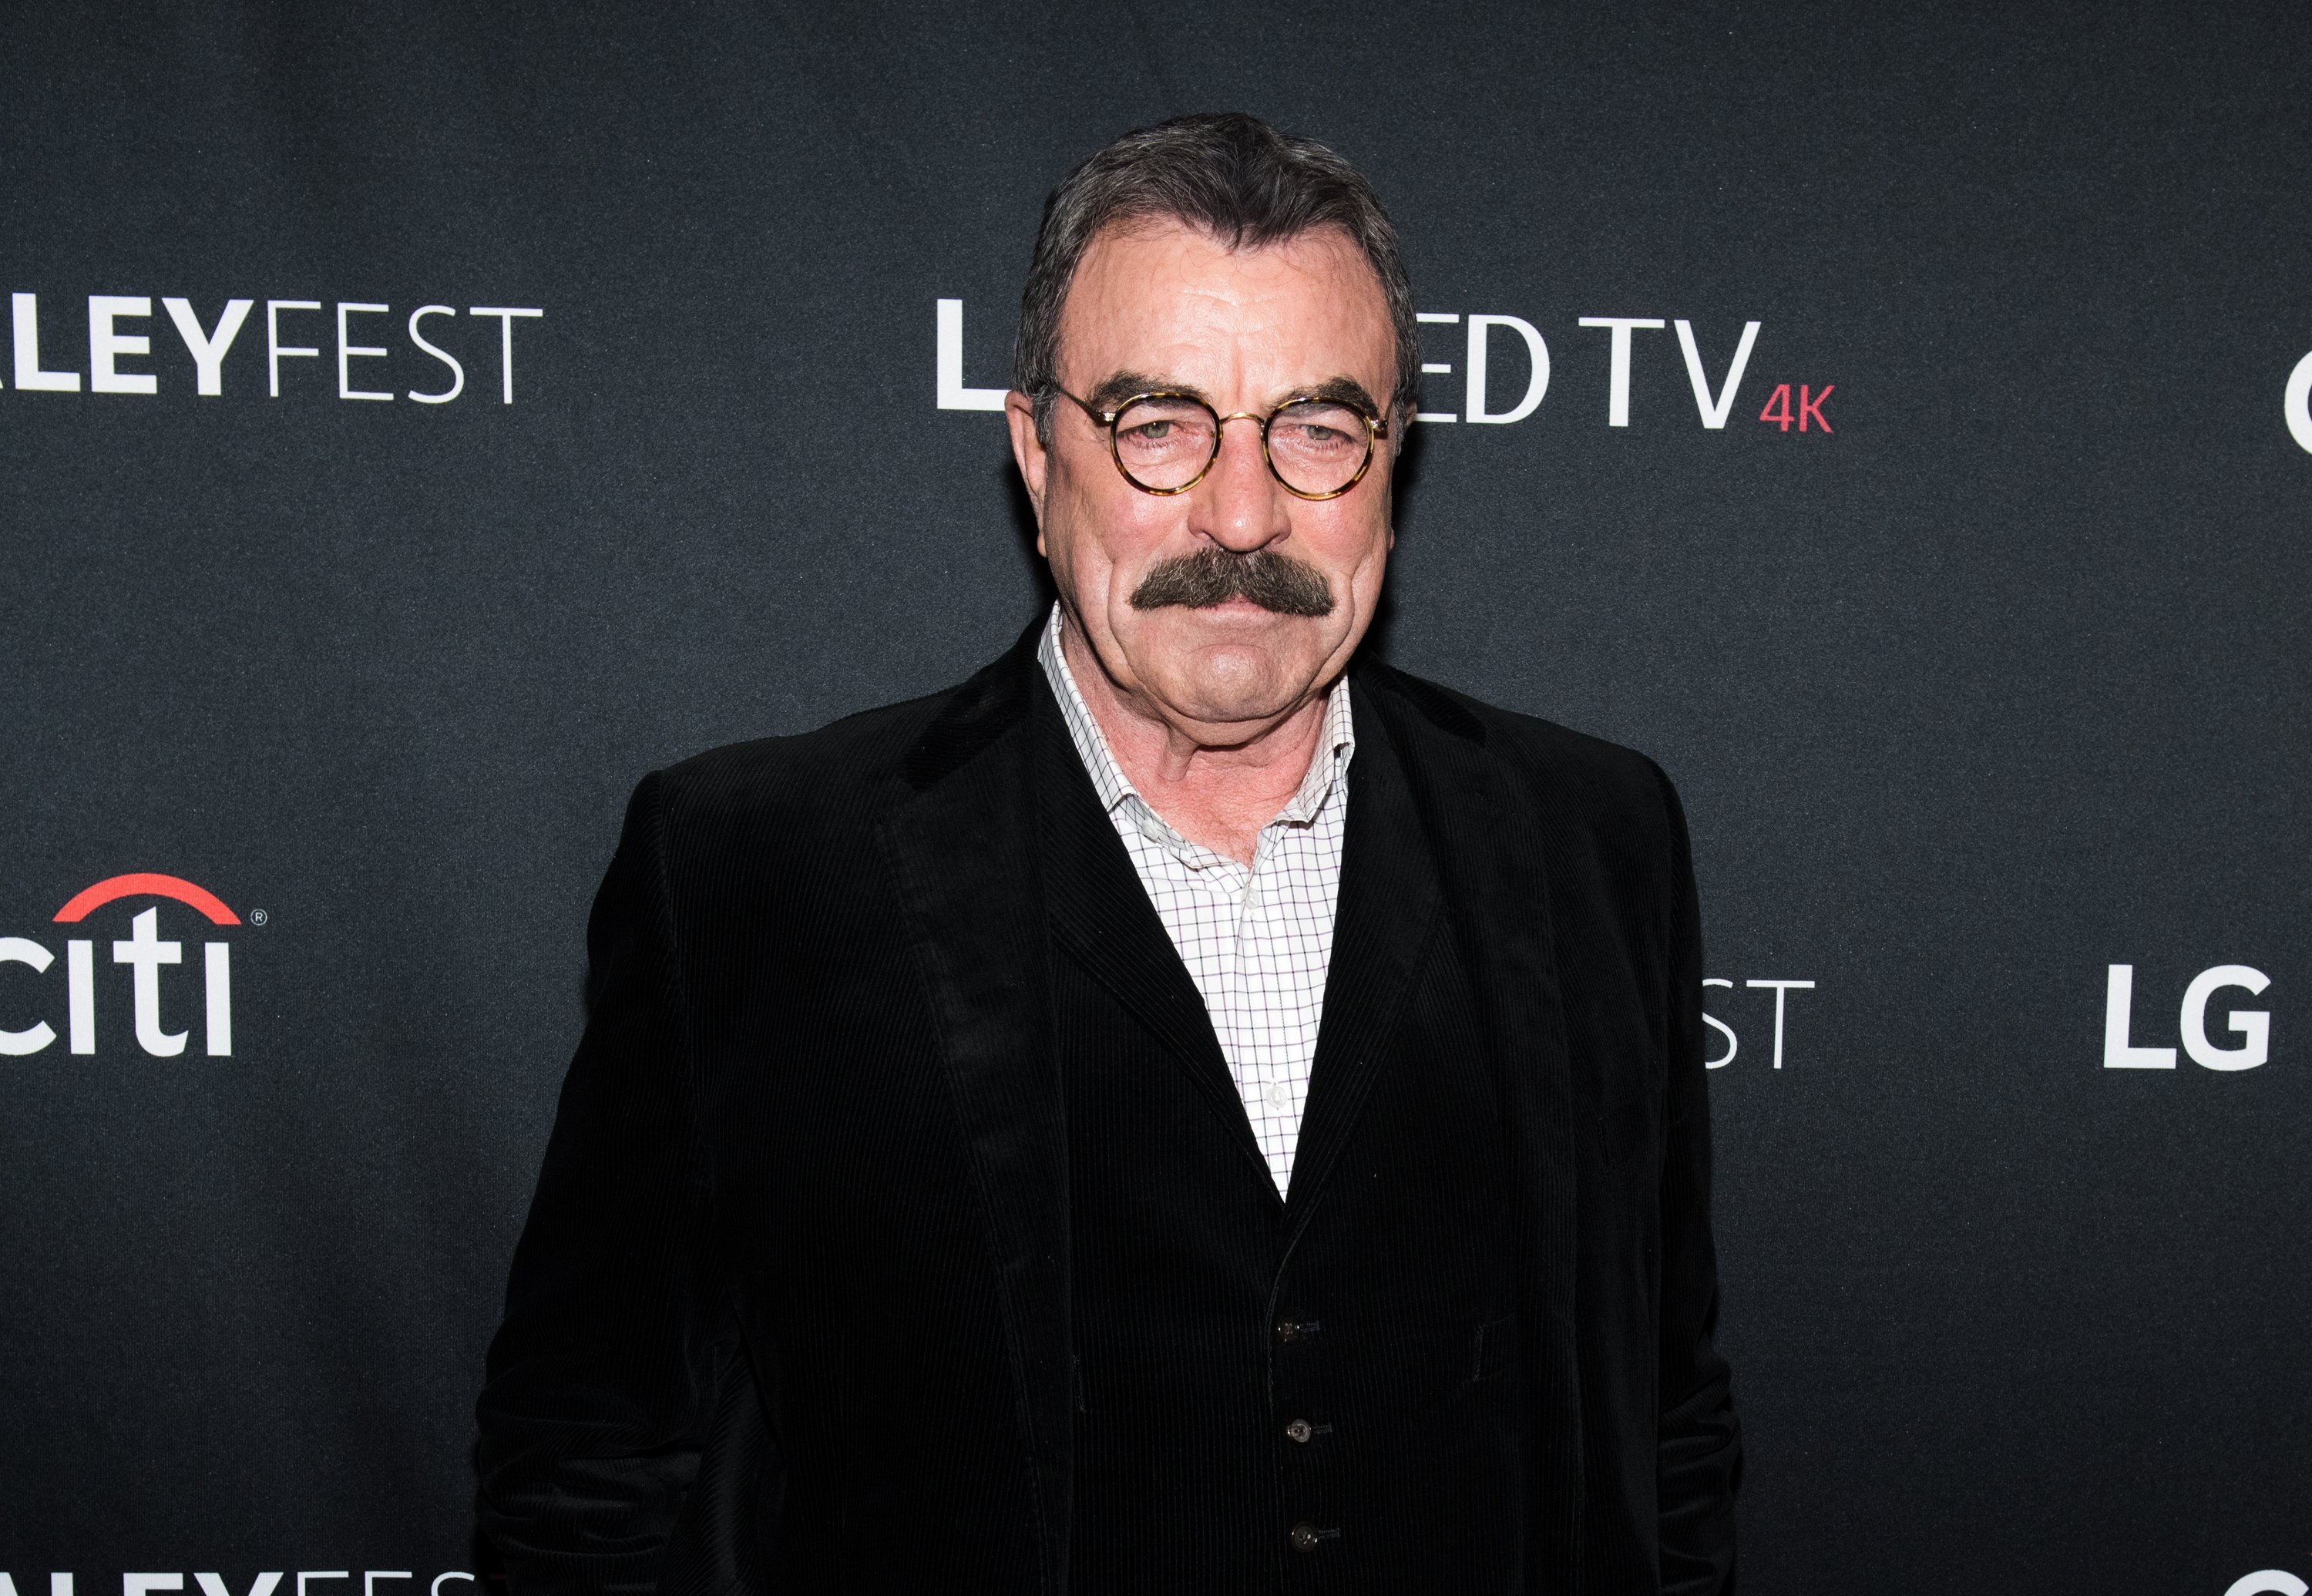 Tom Selleck attends the "Blue Bloods" screening at PaleyFest NY in New York City on October 16, 2017 | Photo: Getty Images